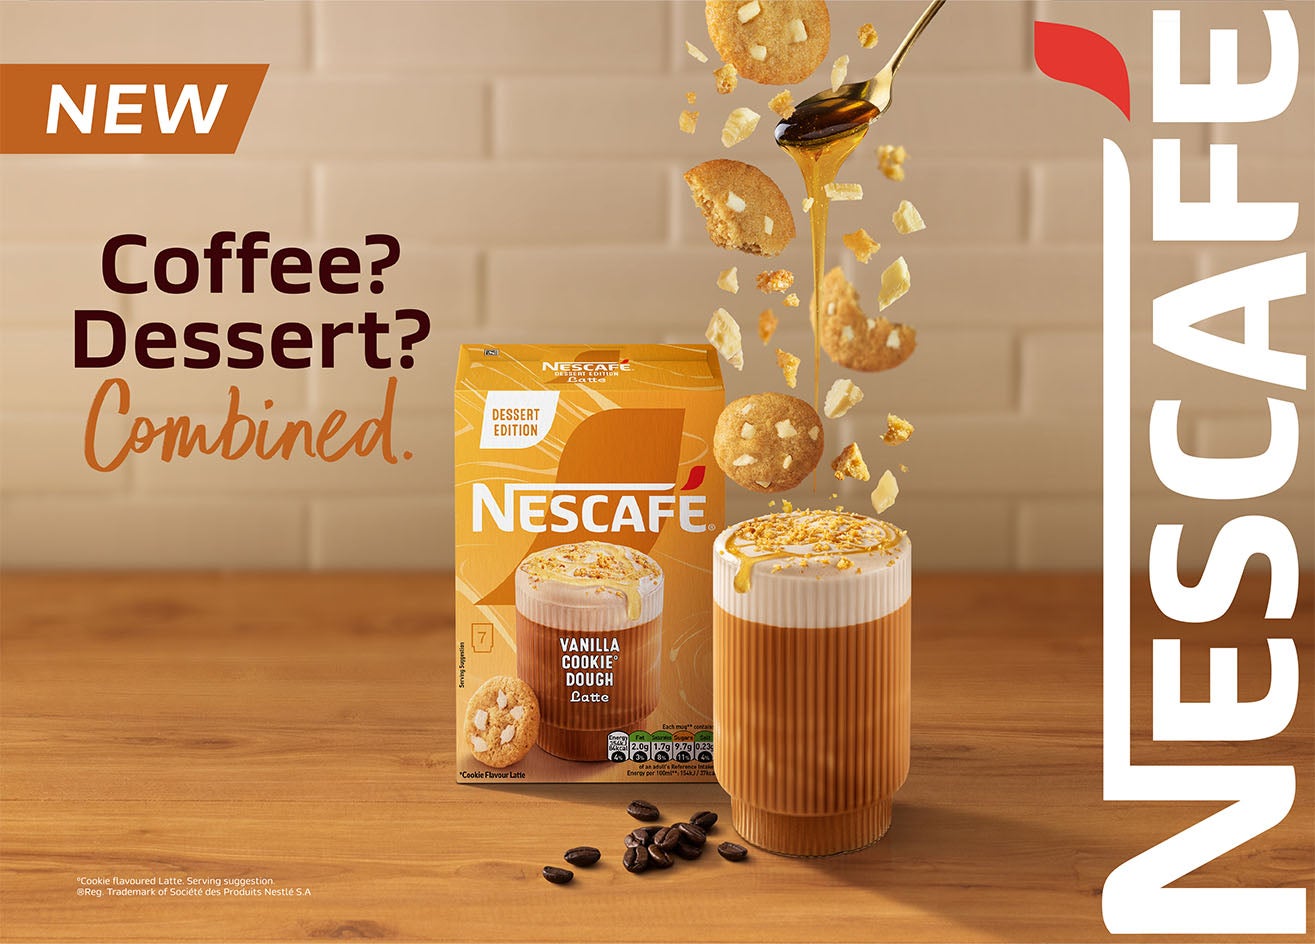 Introducing our NESCAFE Frothy Desserts Editions, which includes a Sticky Toffee Pudding Latte and a Vanilla Cookie Dough Latte.